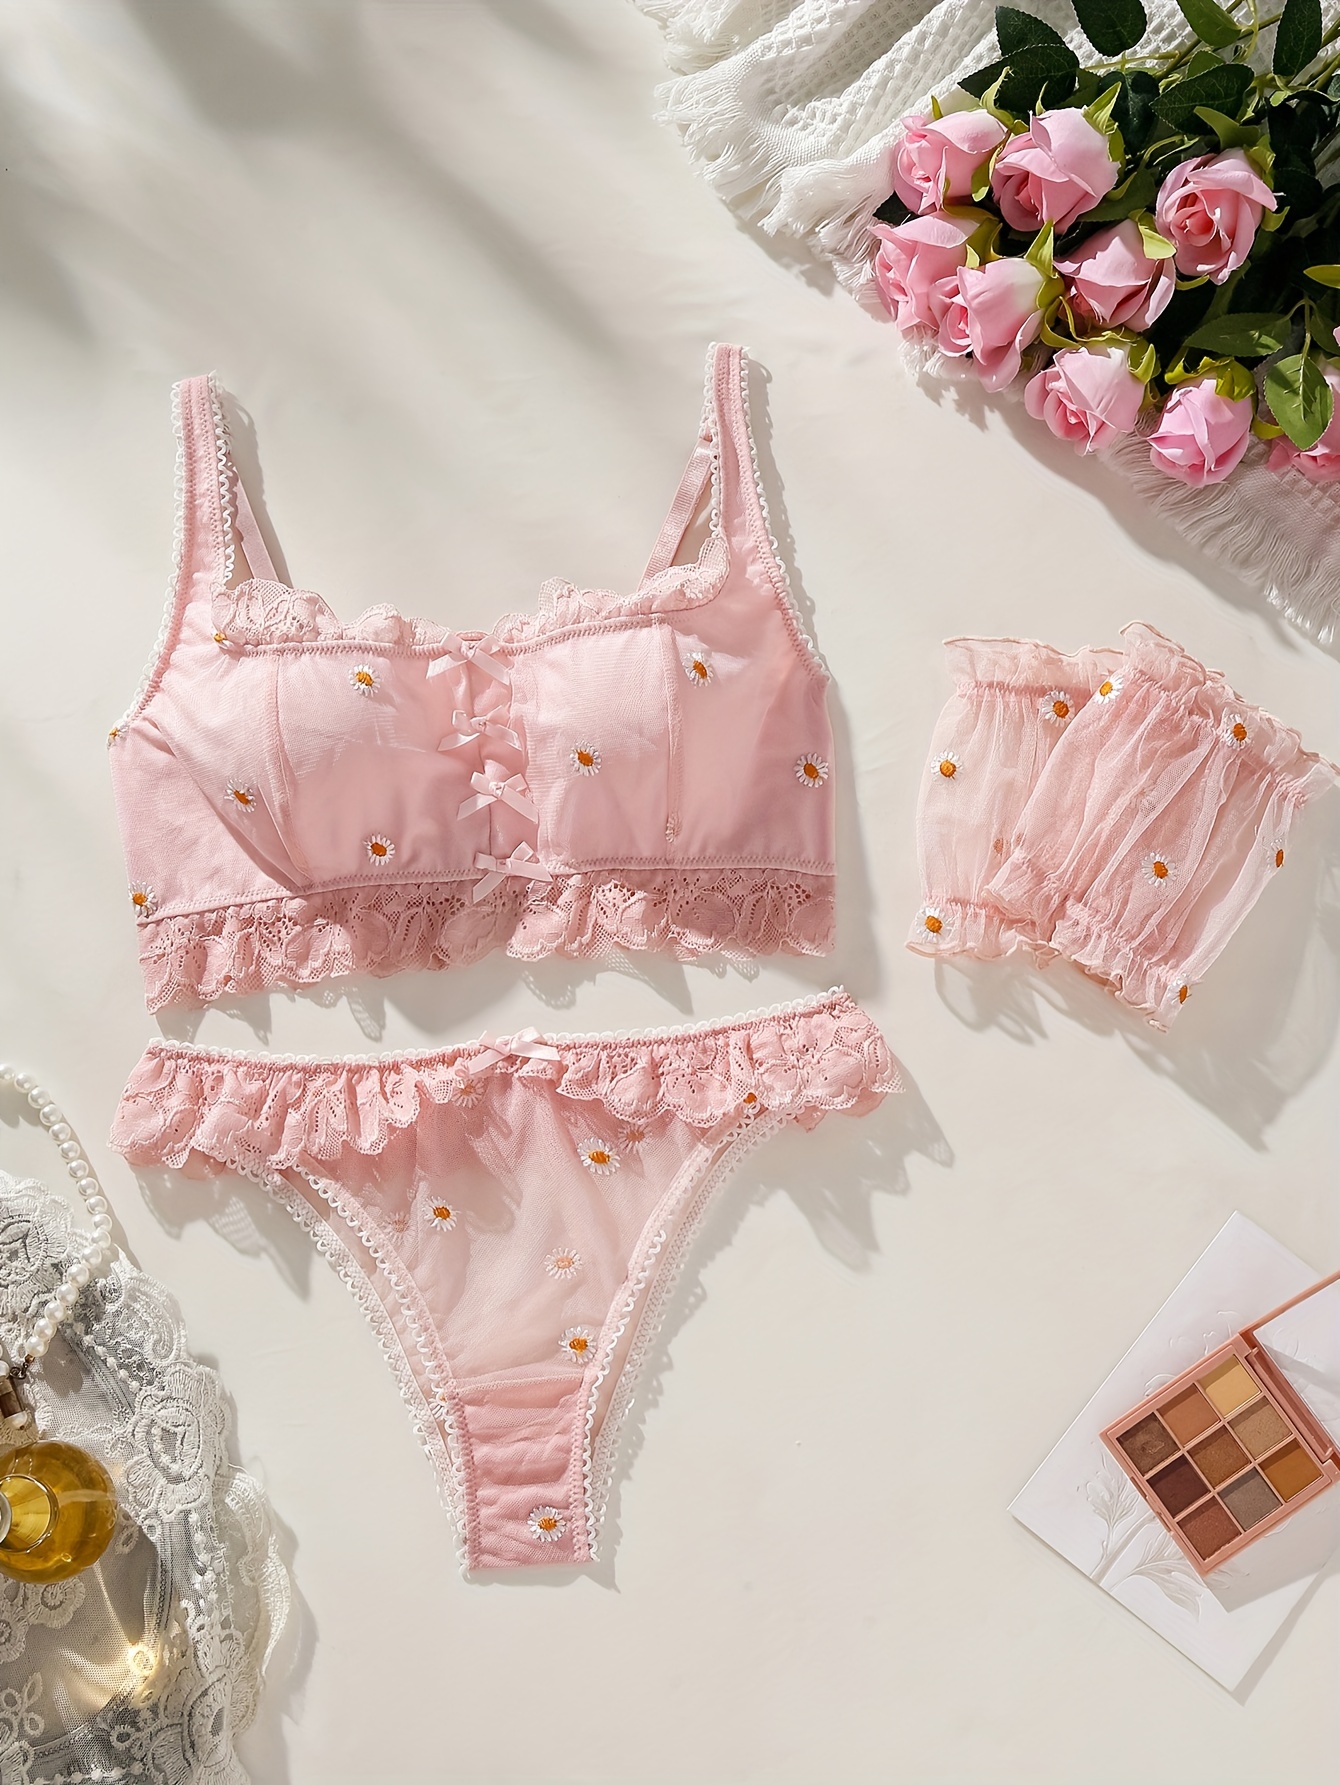 Is That The New Kawaii Solid Lace Bralette ??